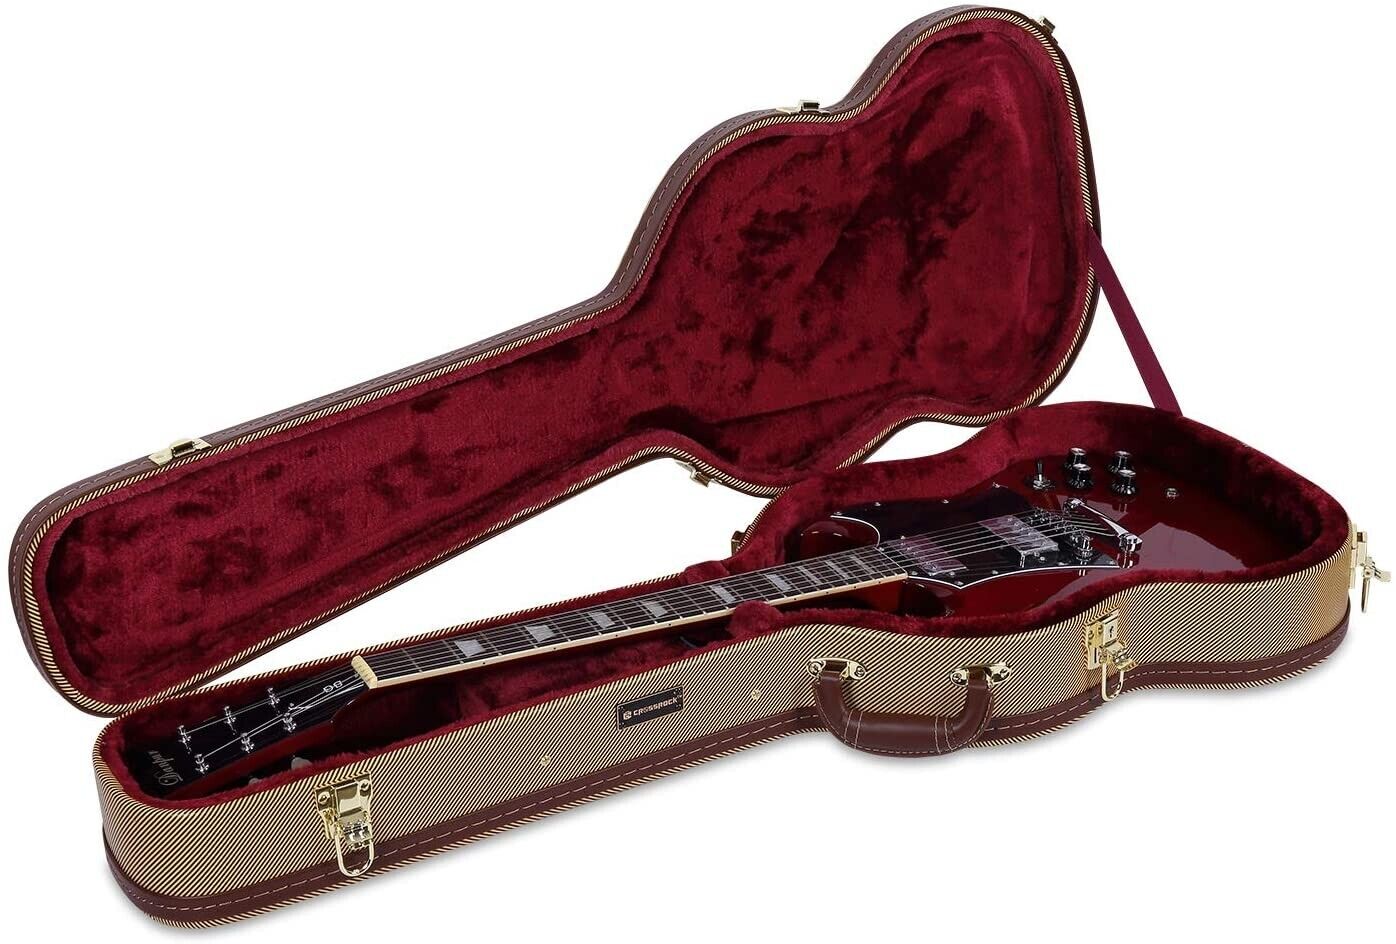 Crossrock Vintage Hard Case for Gibson SG and Similar Style Electric Guitars